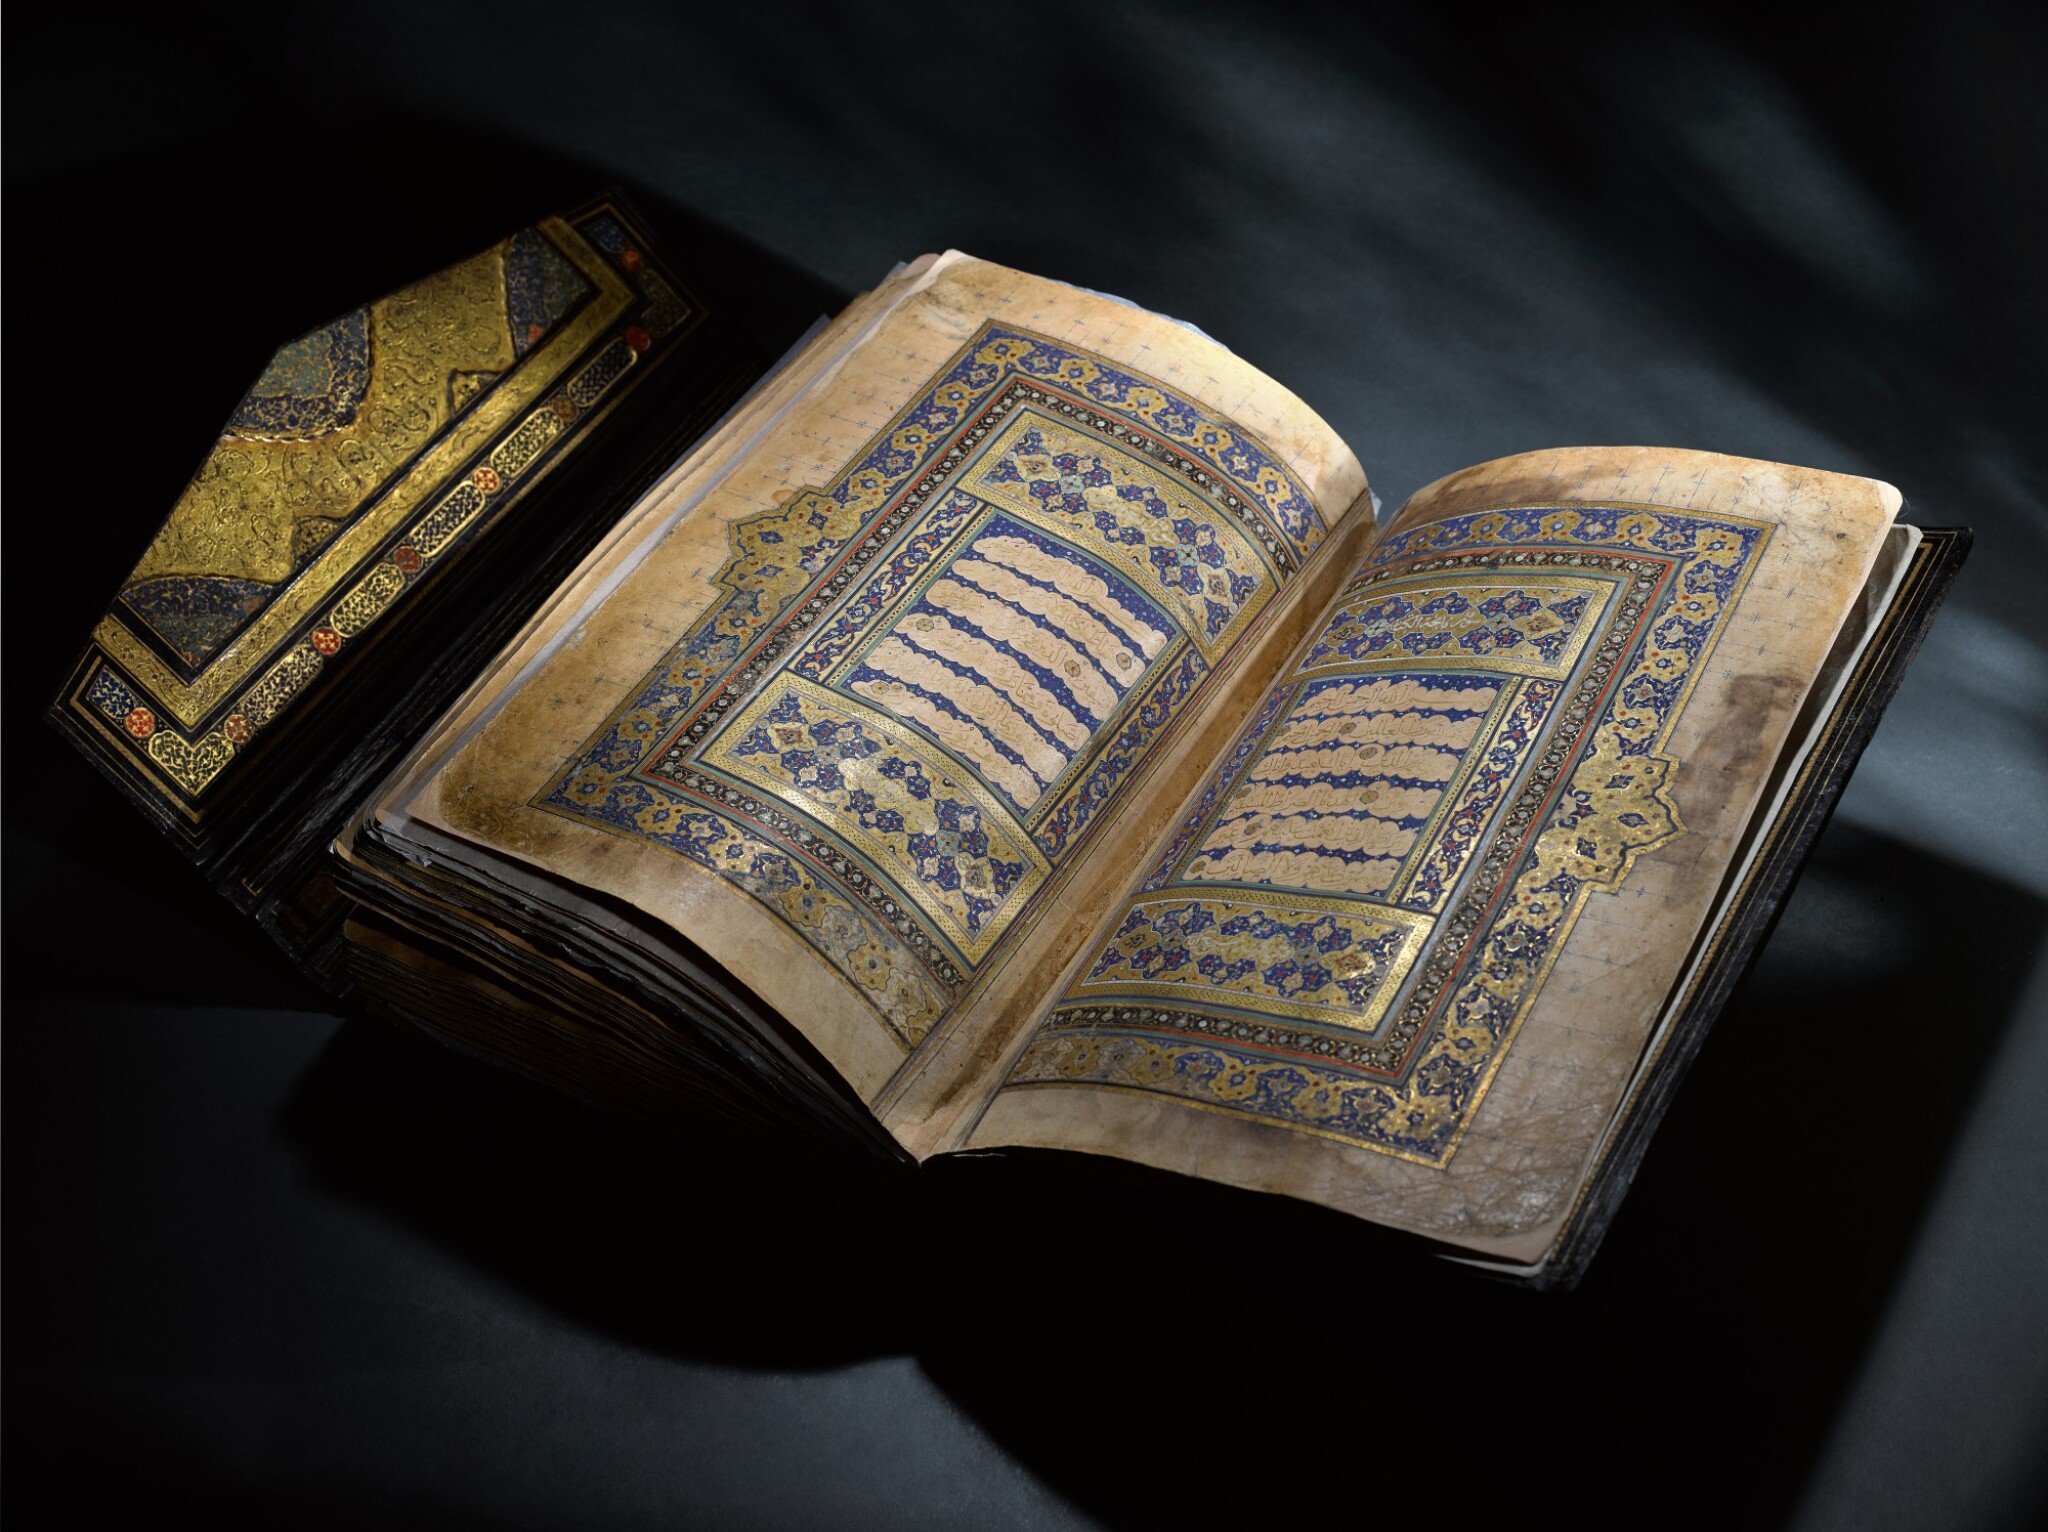 Gilded Quran and Islamic Manuscripts Auctioned in London